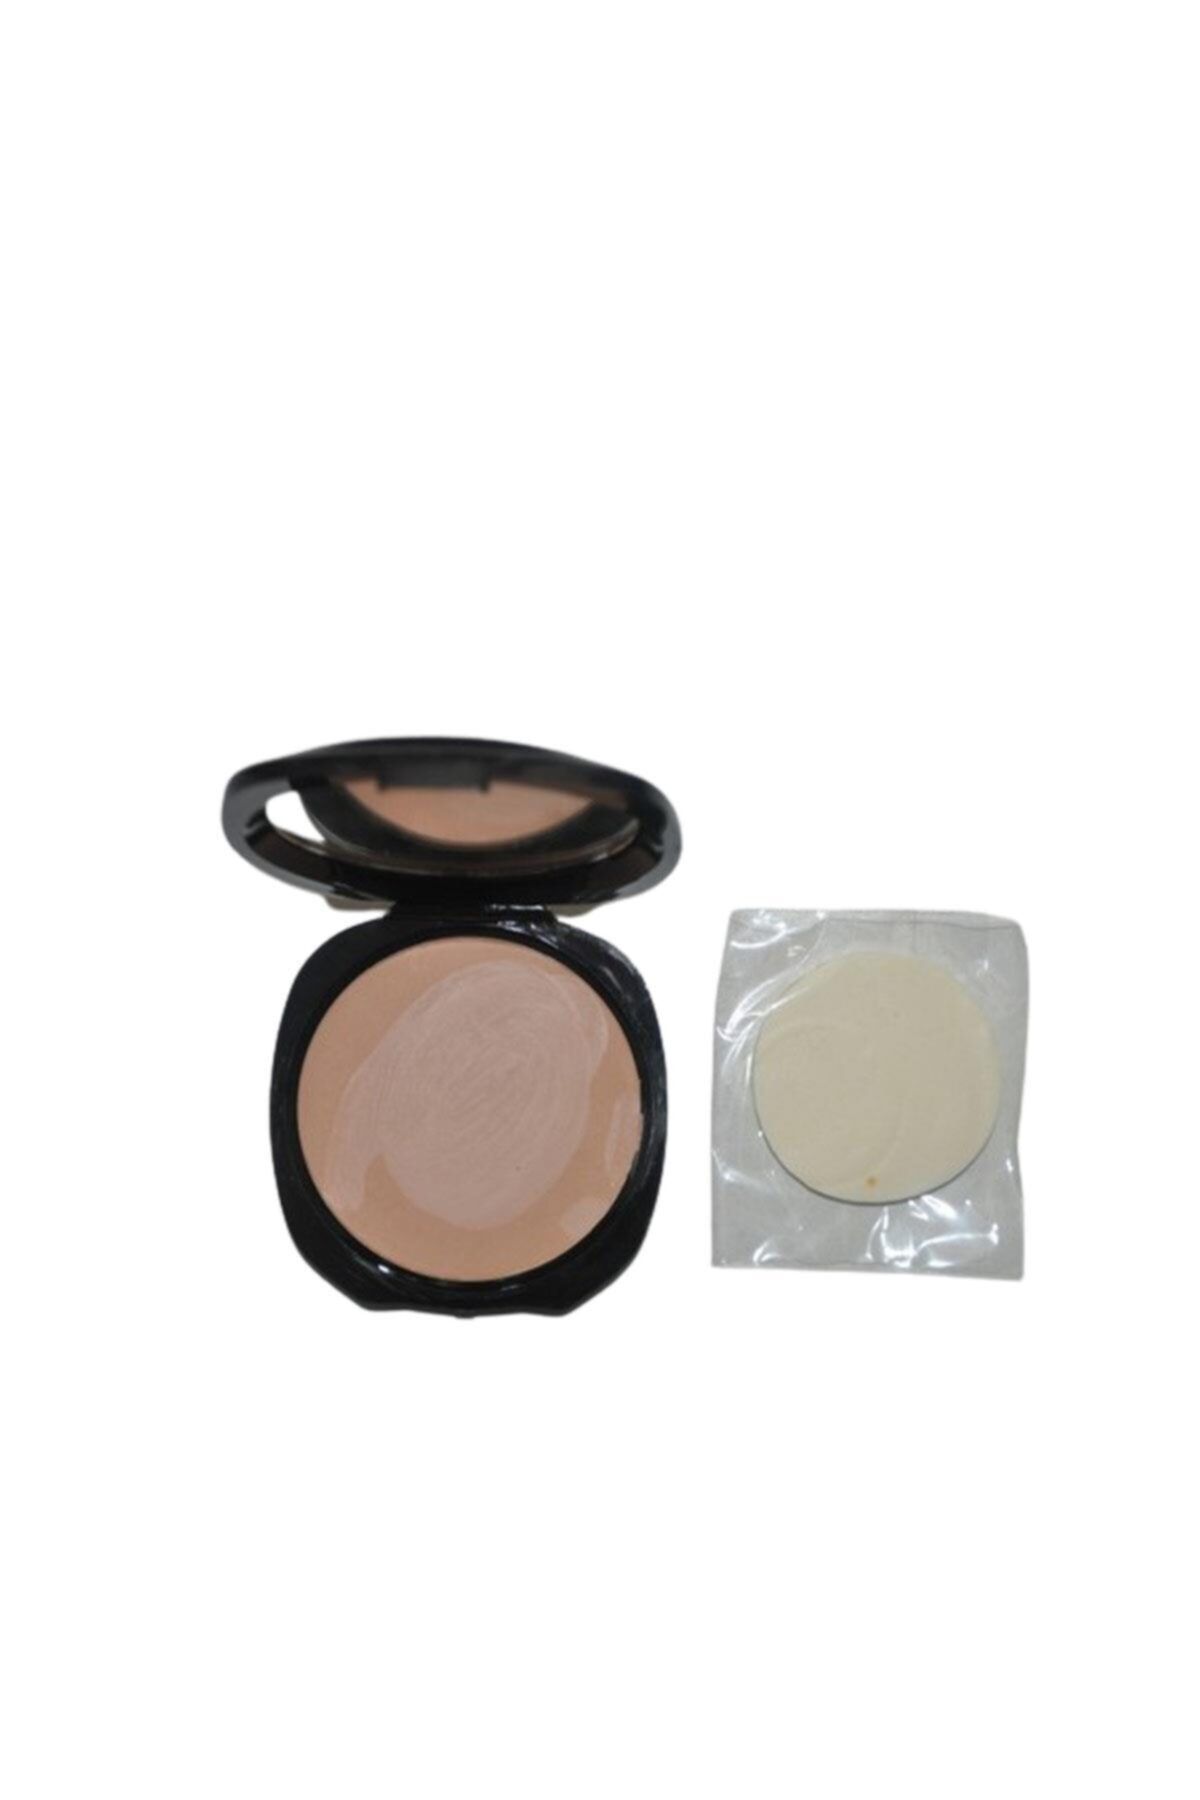 Catherine Arley Silky Touch Cream Compact 03